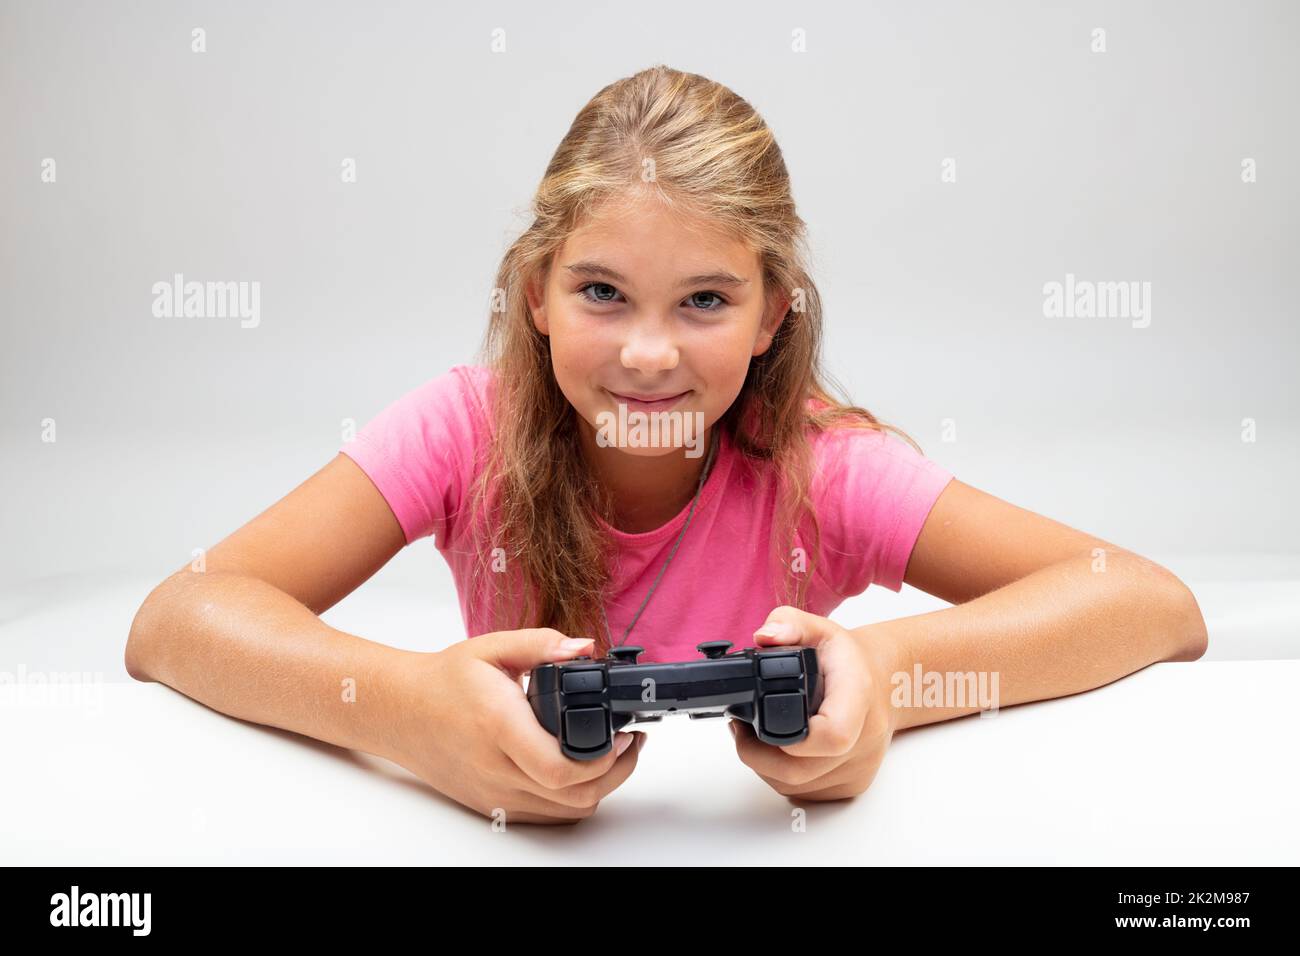 Pretty little girl holding a gaming console Stock Photo